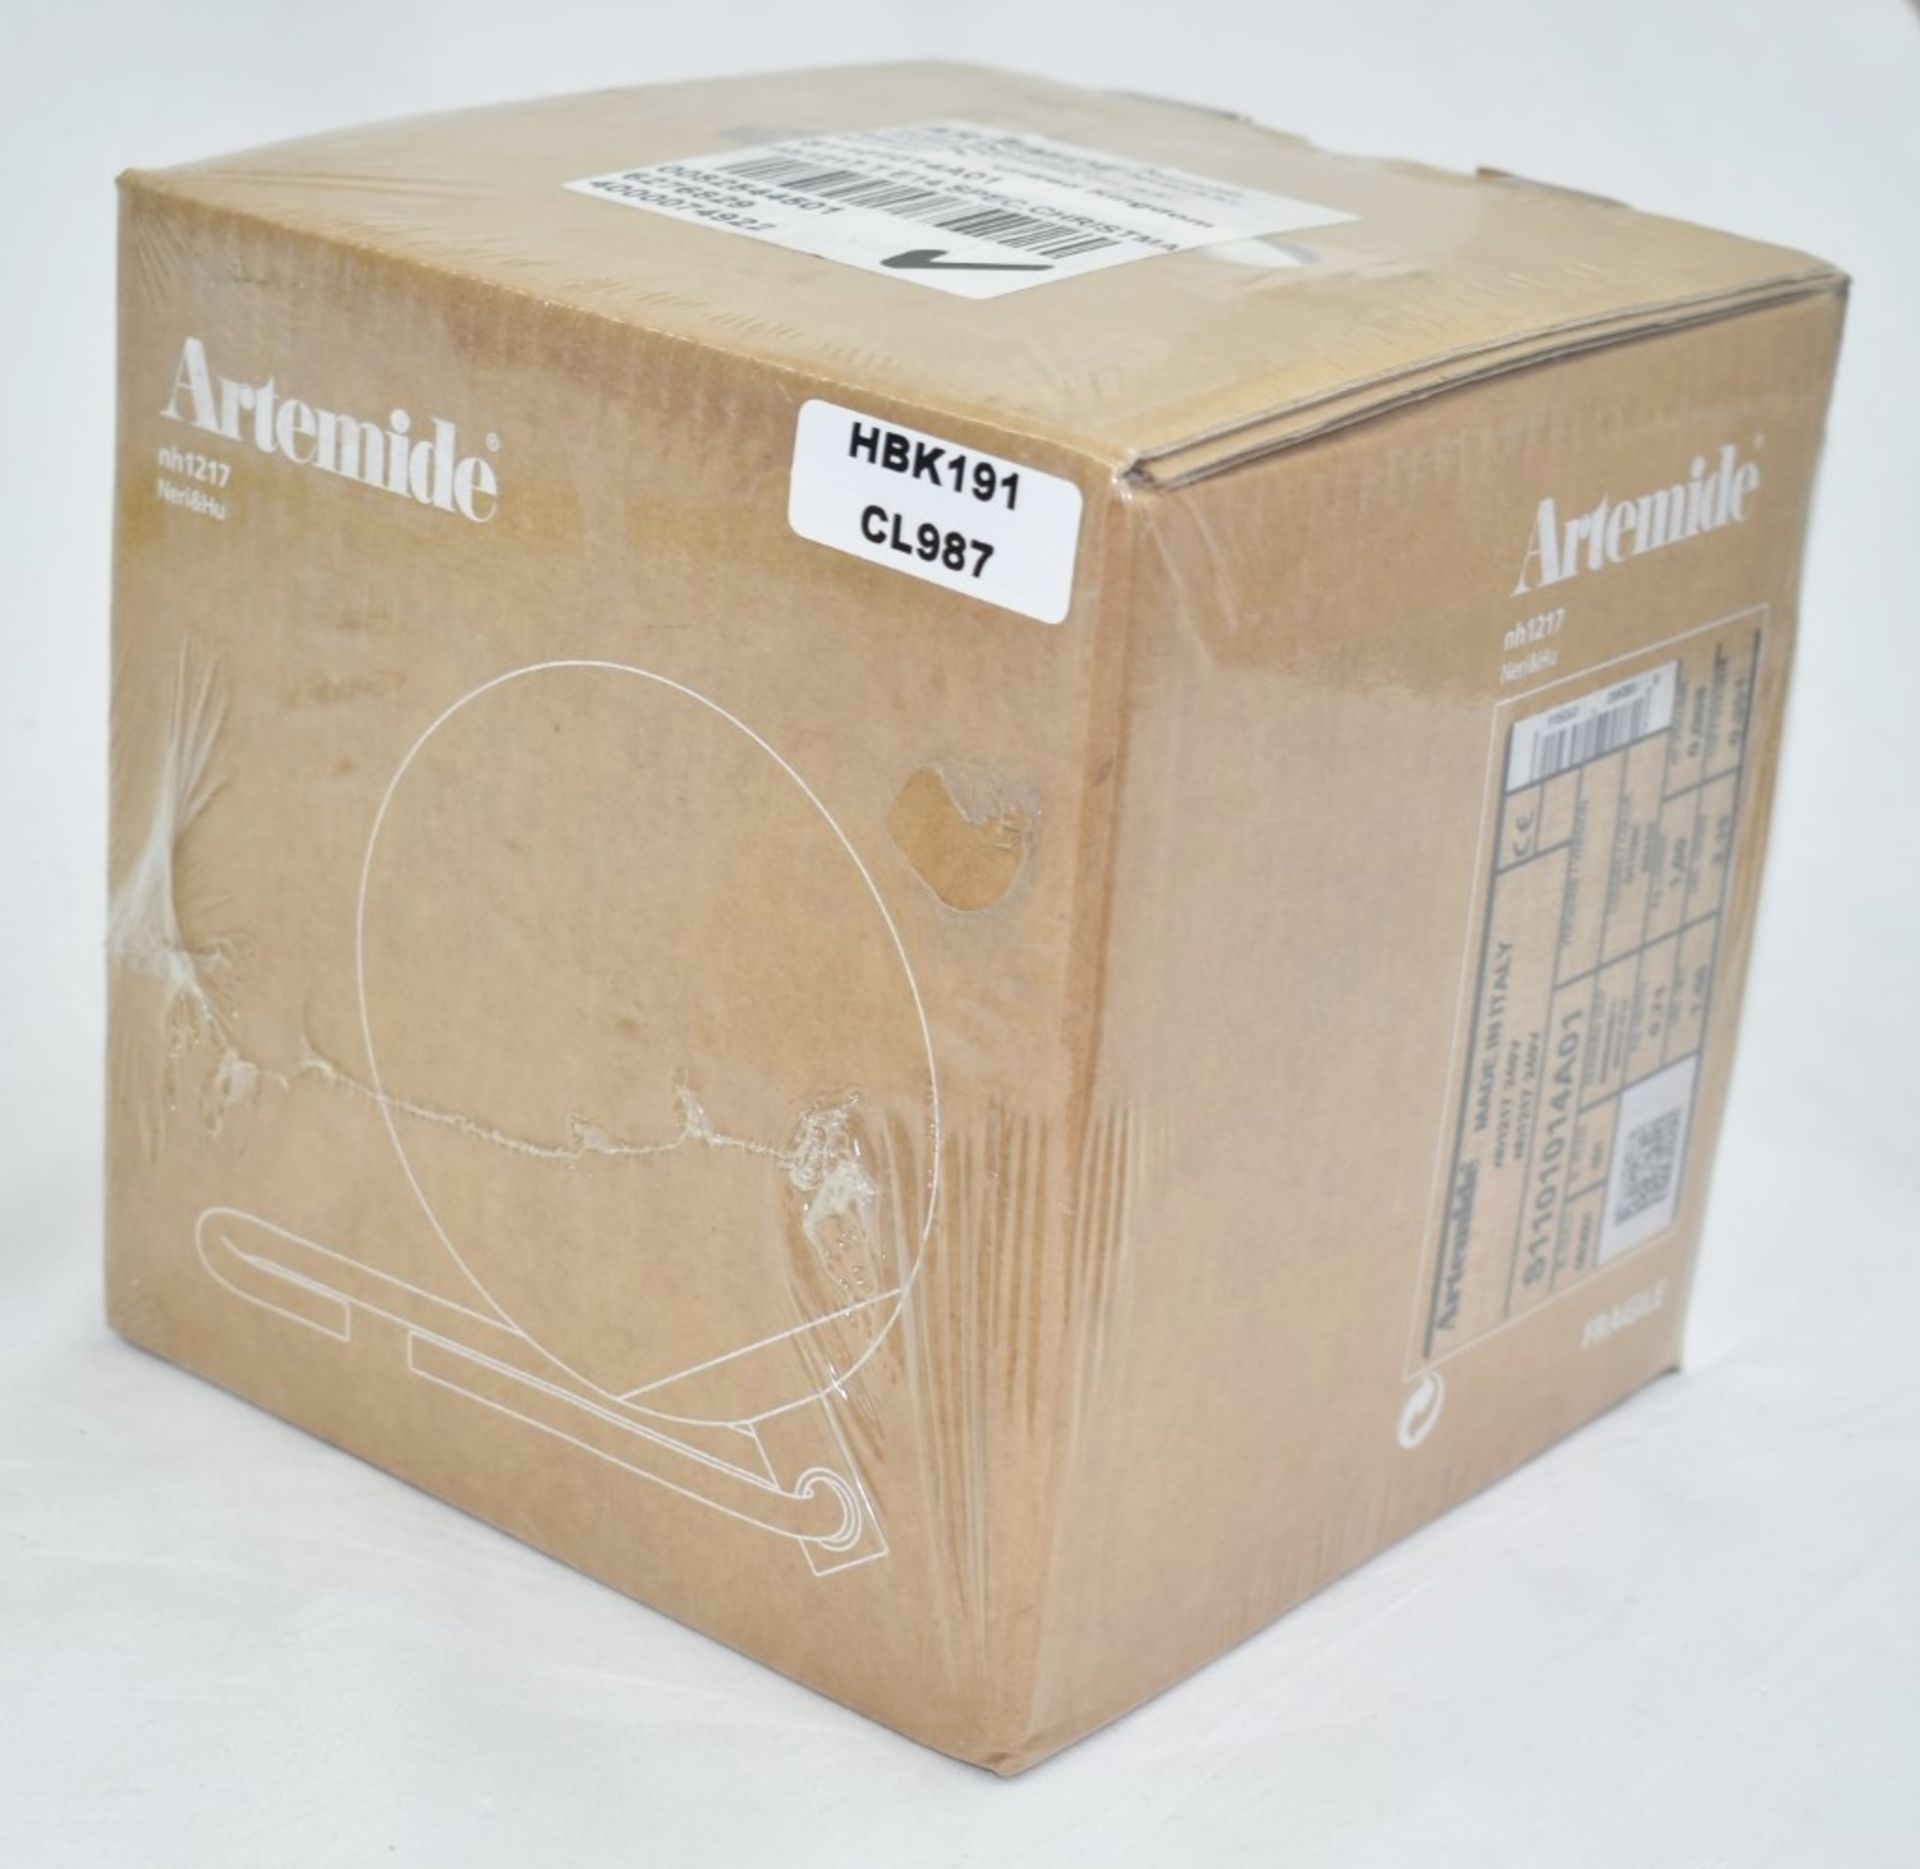 1 x ARTEMIDE 'NH1217' Designer Table Lamp With Blown Glass Diffuser - Original RRP £208.00 - Sealed - Image 4 of 5